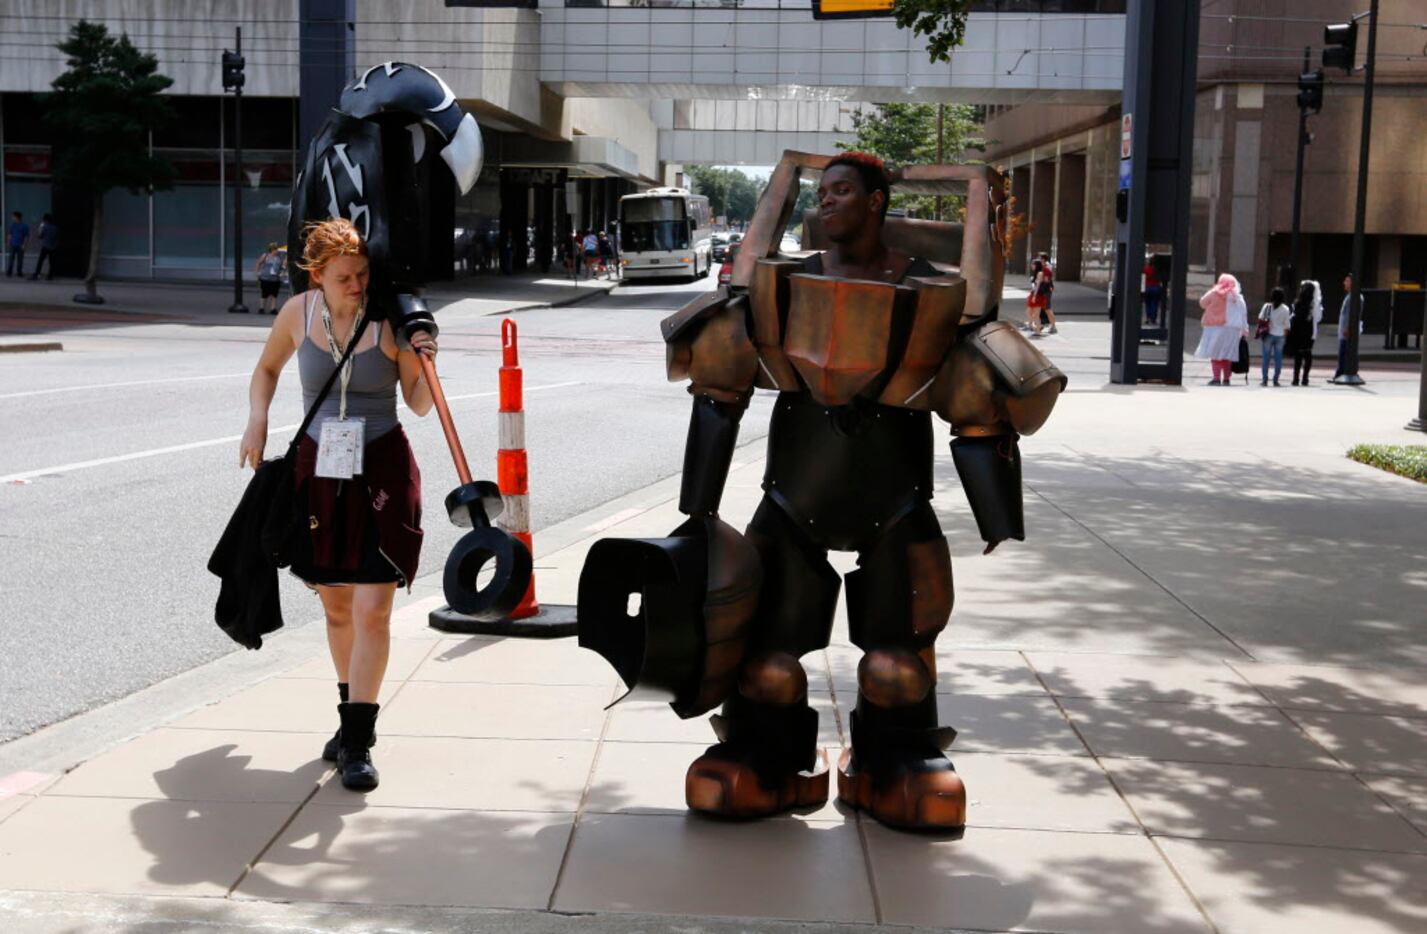 Valerie Nystrom, left, helps Hioshi Jackson, in costume as Nautilus from League of Legends...